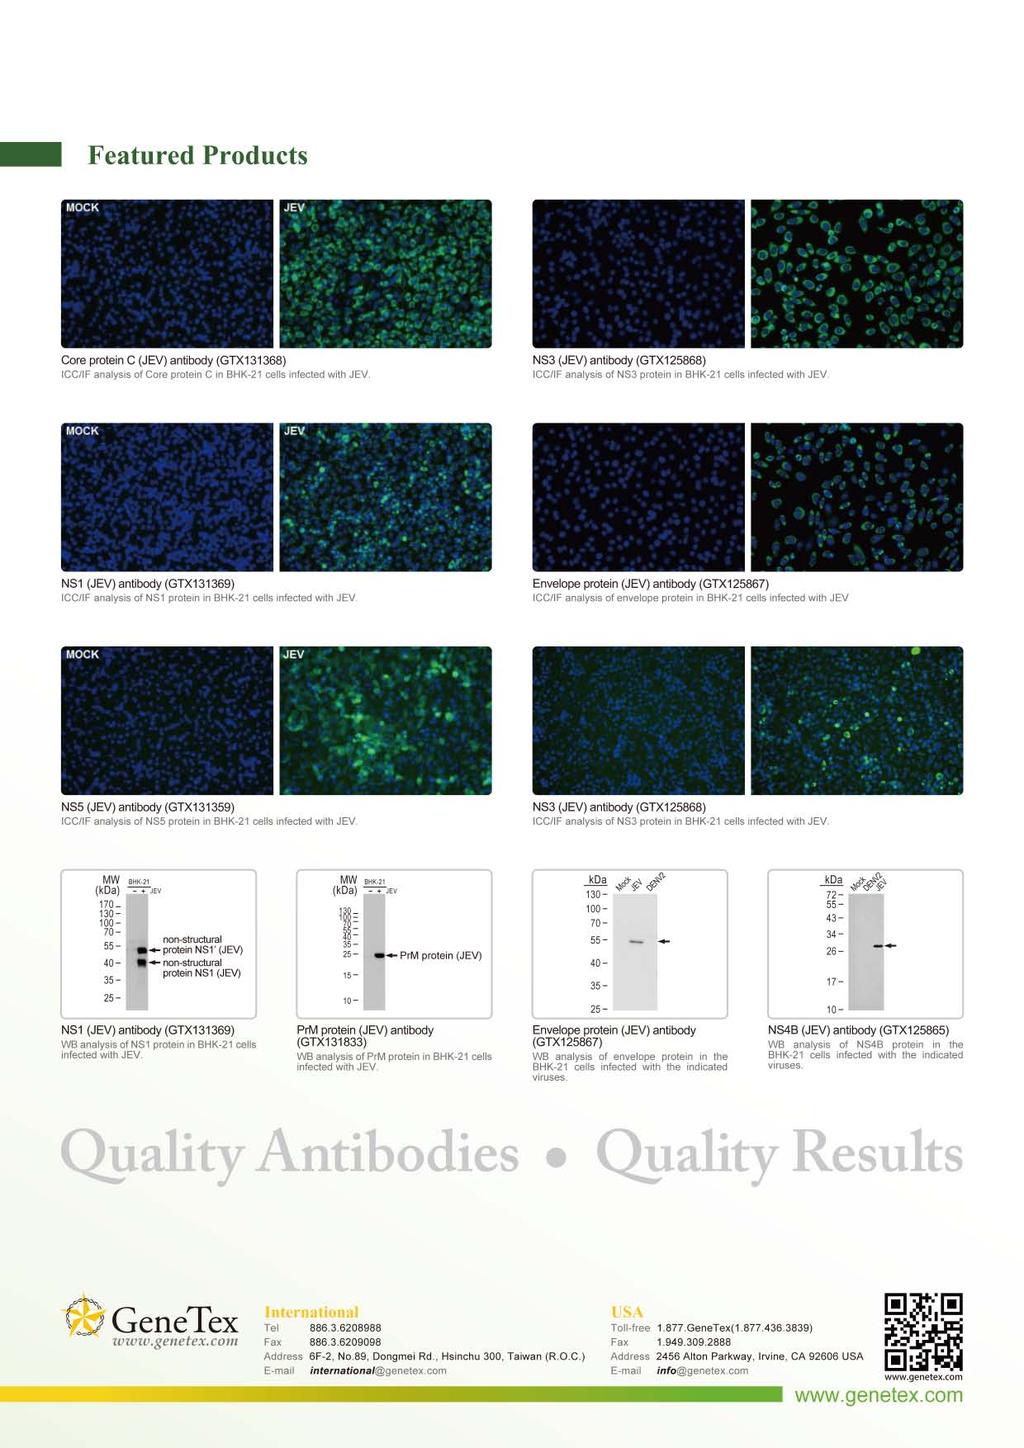 Featured Products Core protein C (JEV) antibody (GTX131368) CC/F analysis of Core protein C in BHK-21 cells infected with JEV.